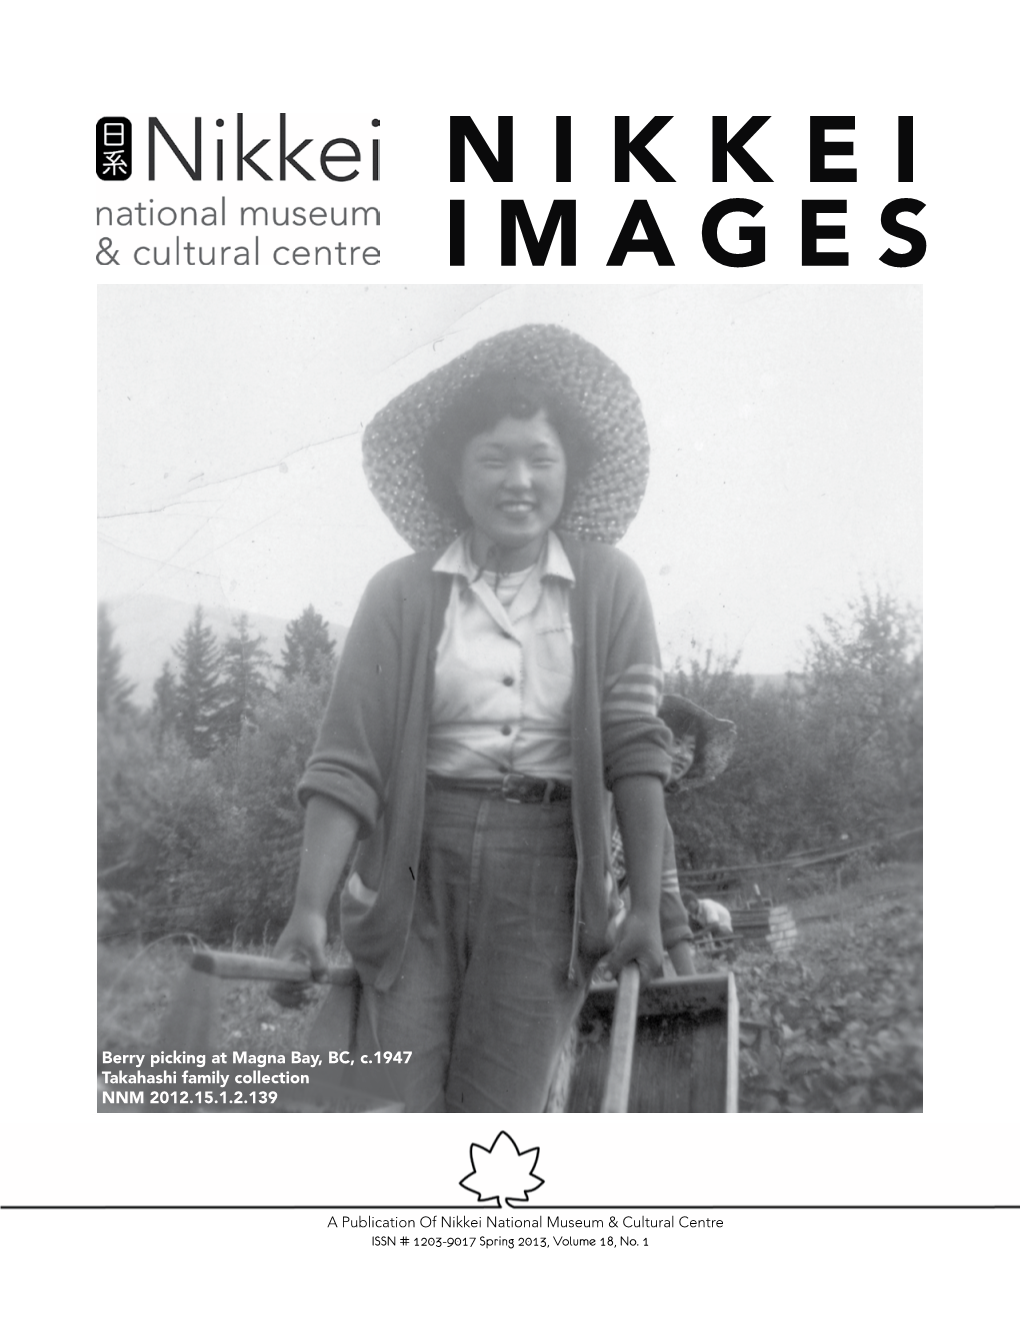 Nikkei Images Is Published by the Nikkei Example of This – All Five Regular Staff Members Are Women